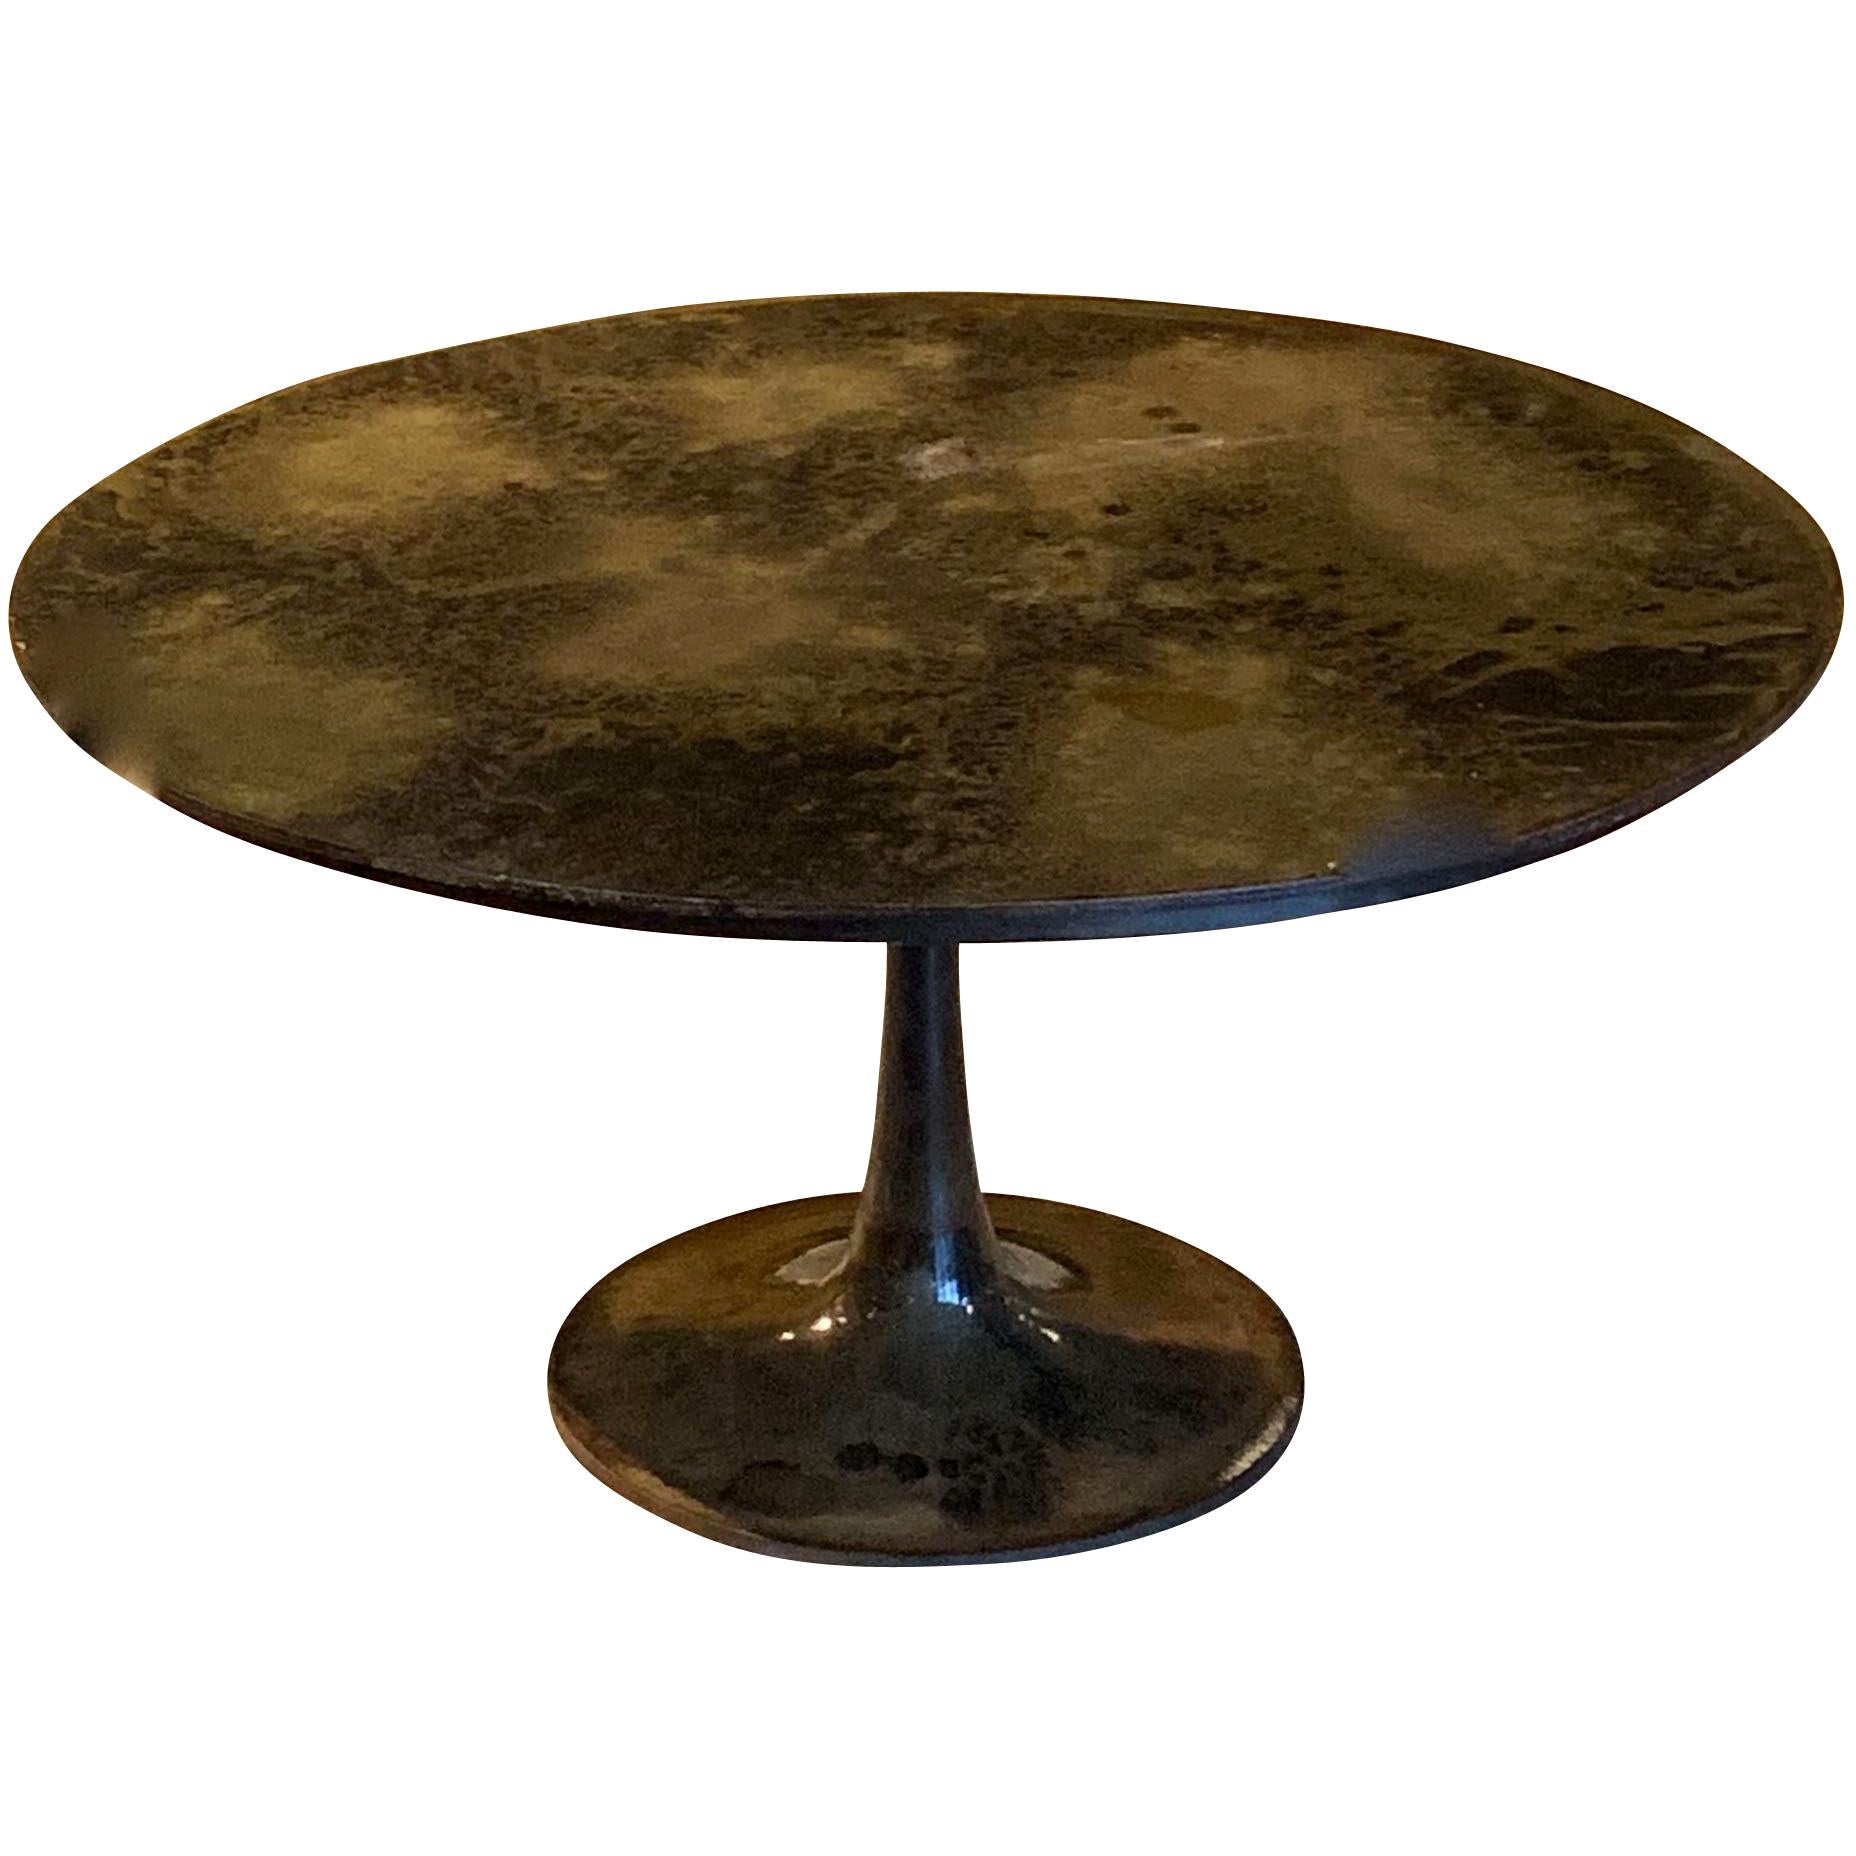 Mottled Bronze Coffee Table, India, Contemporary